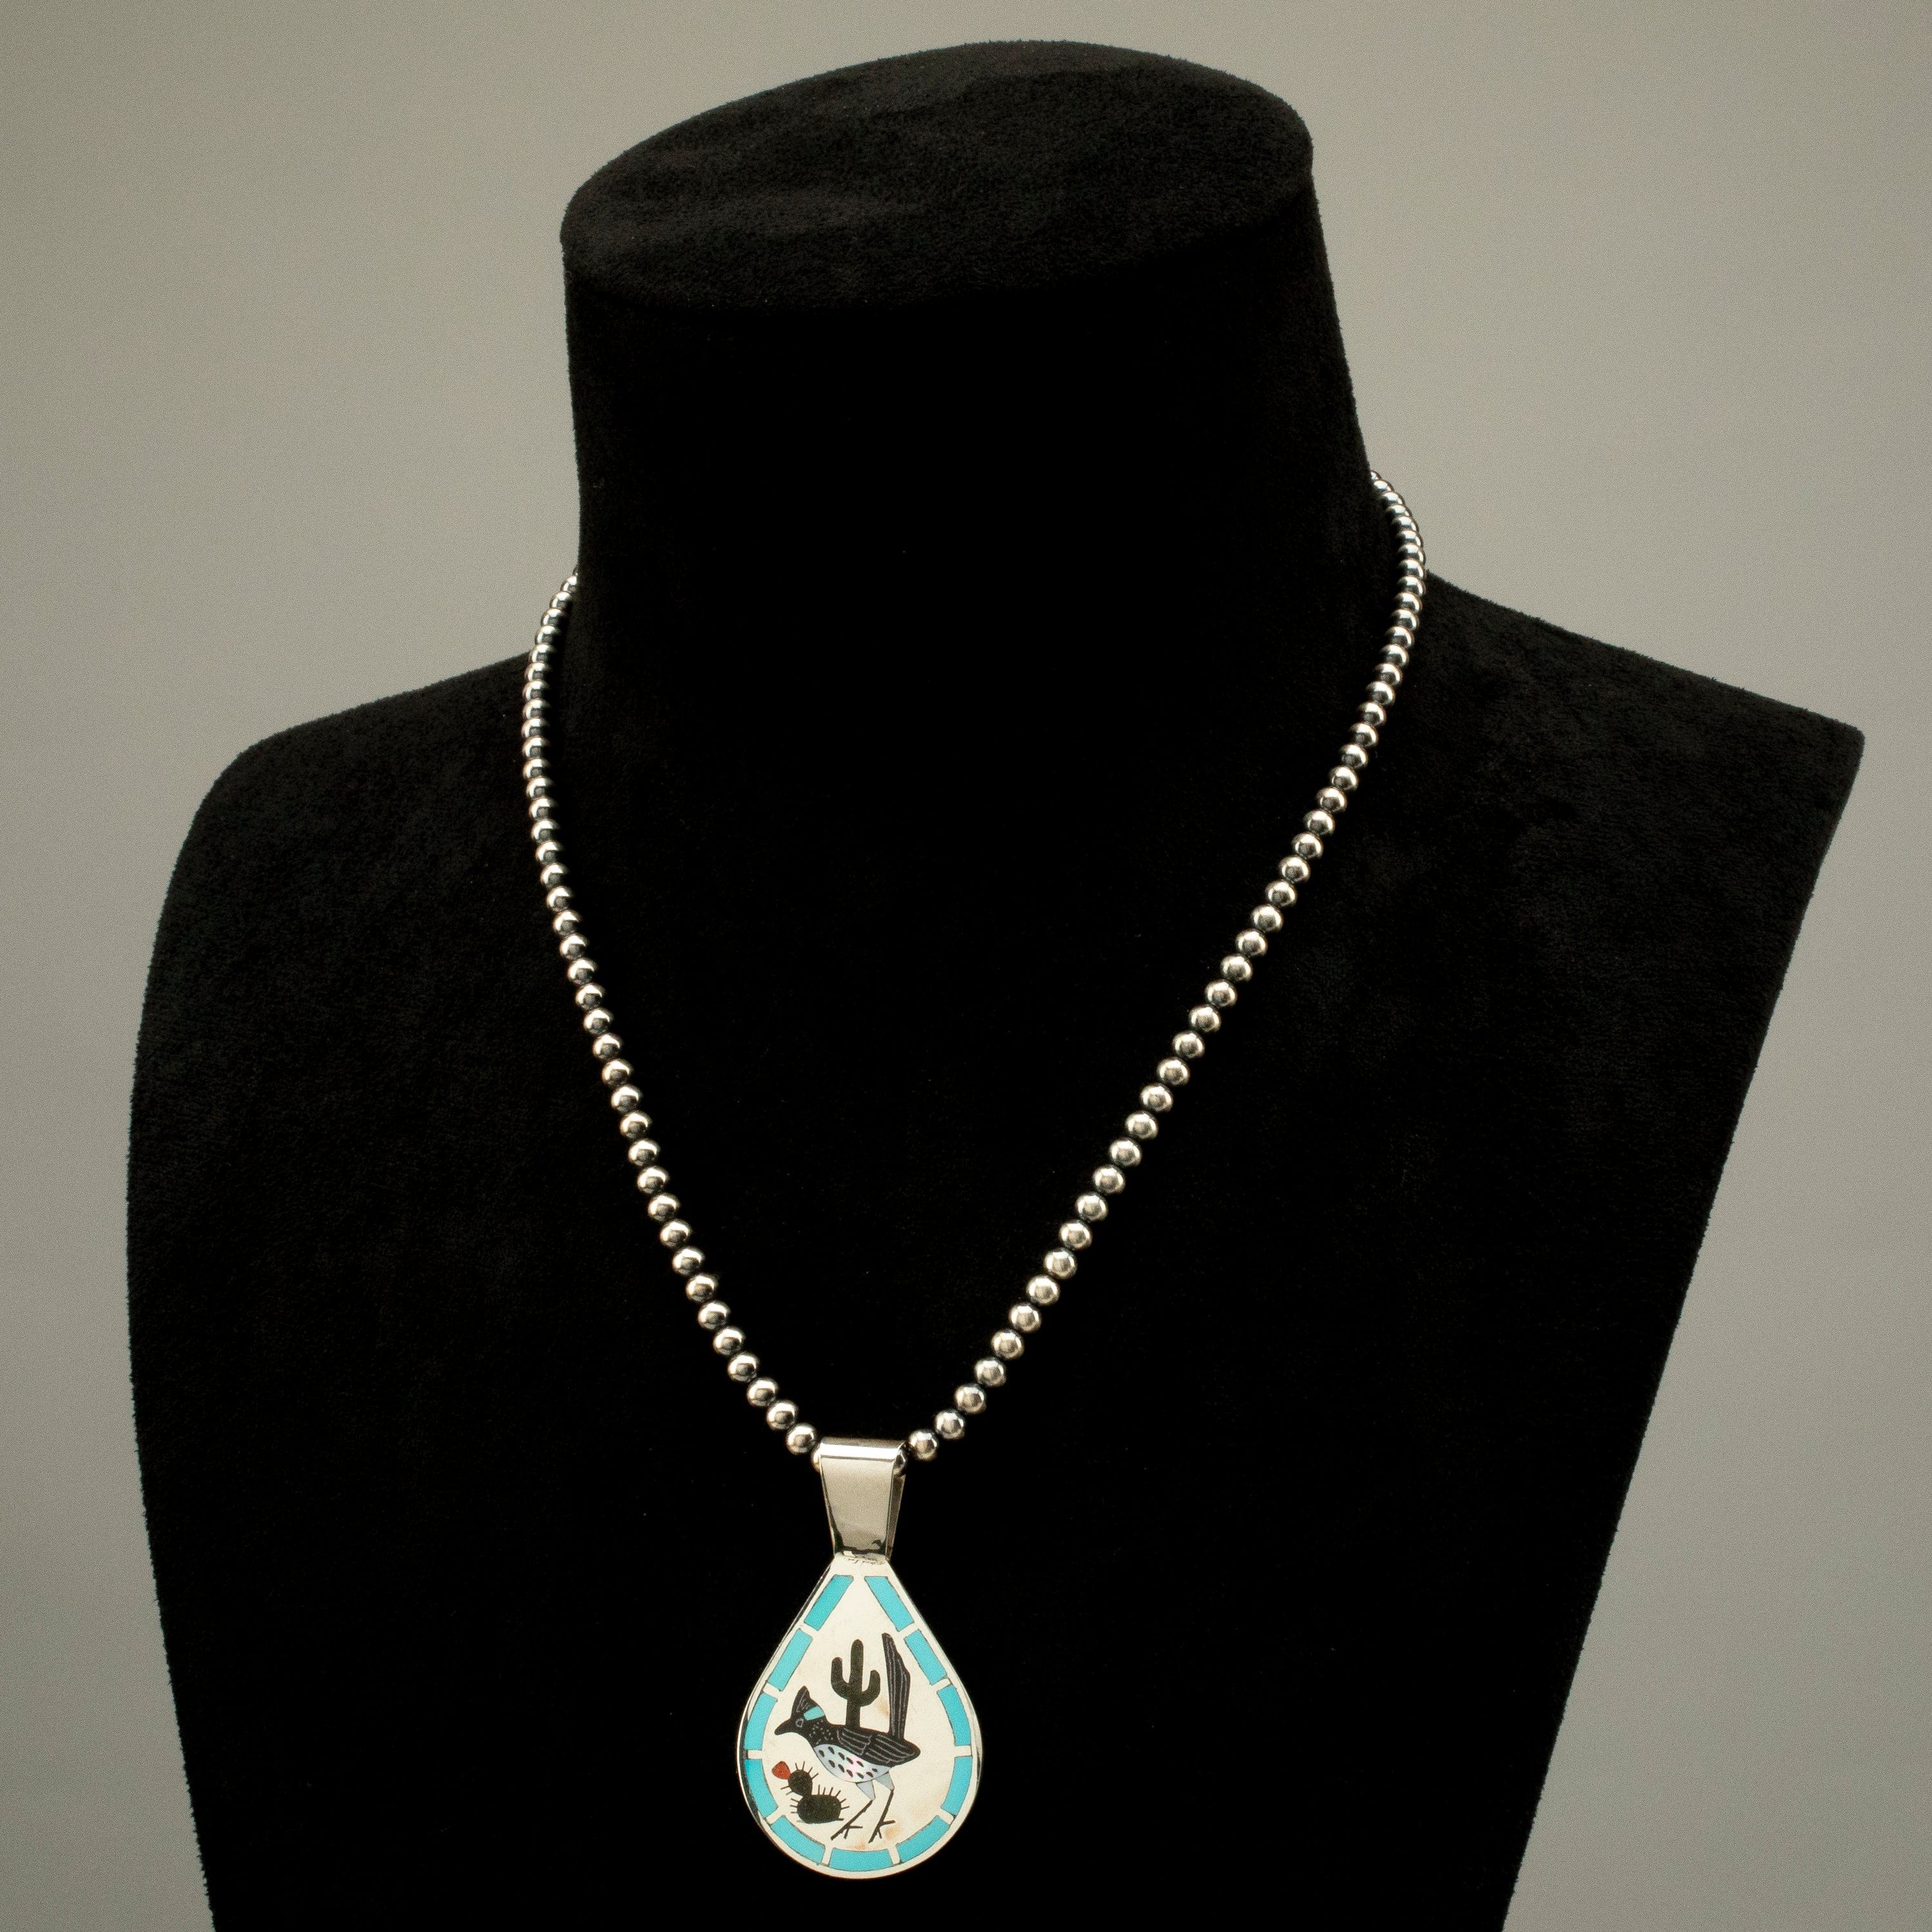 Kalifano Native American Jewelry 18" Dennis & Nancy Edaakie Mutli Gem Road Runner Zuni Inlay Pendant with 4mm Navajo Pearl Necklace USA Native American Made 925 Sterling Silver NAN1500.012